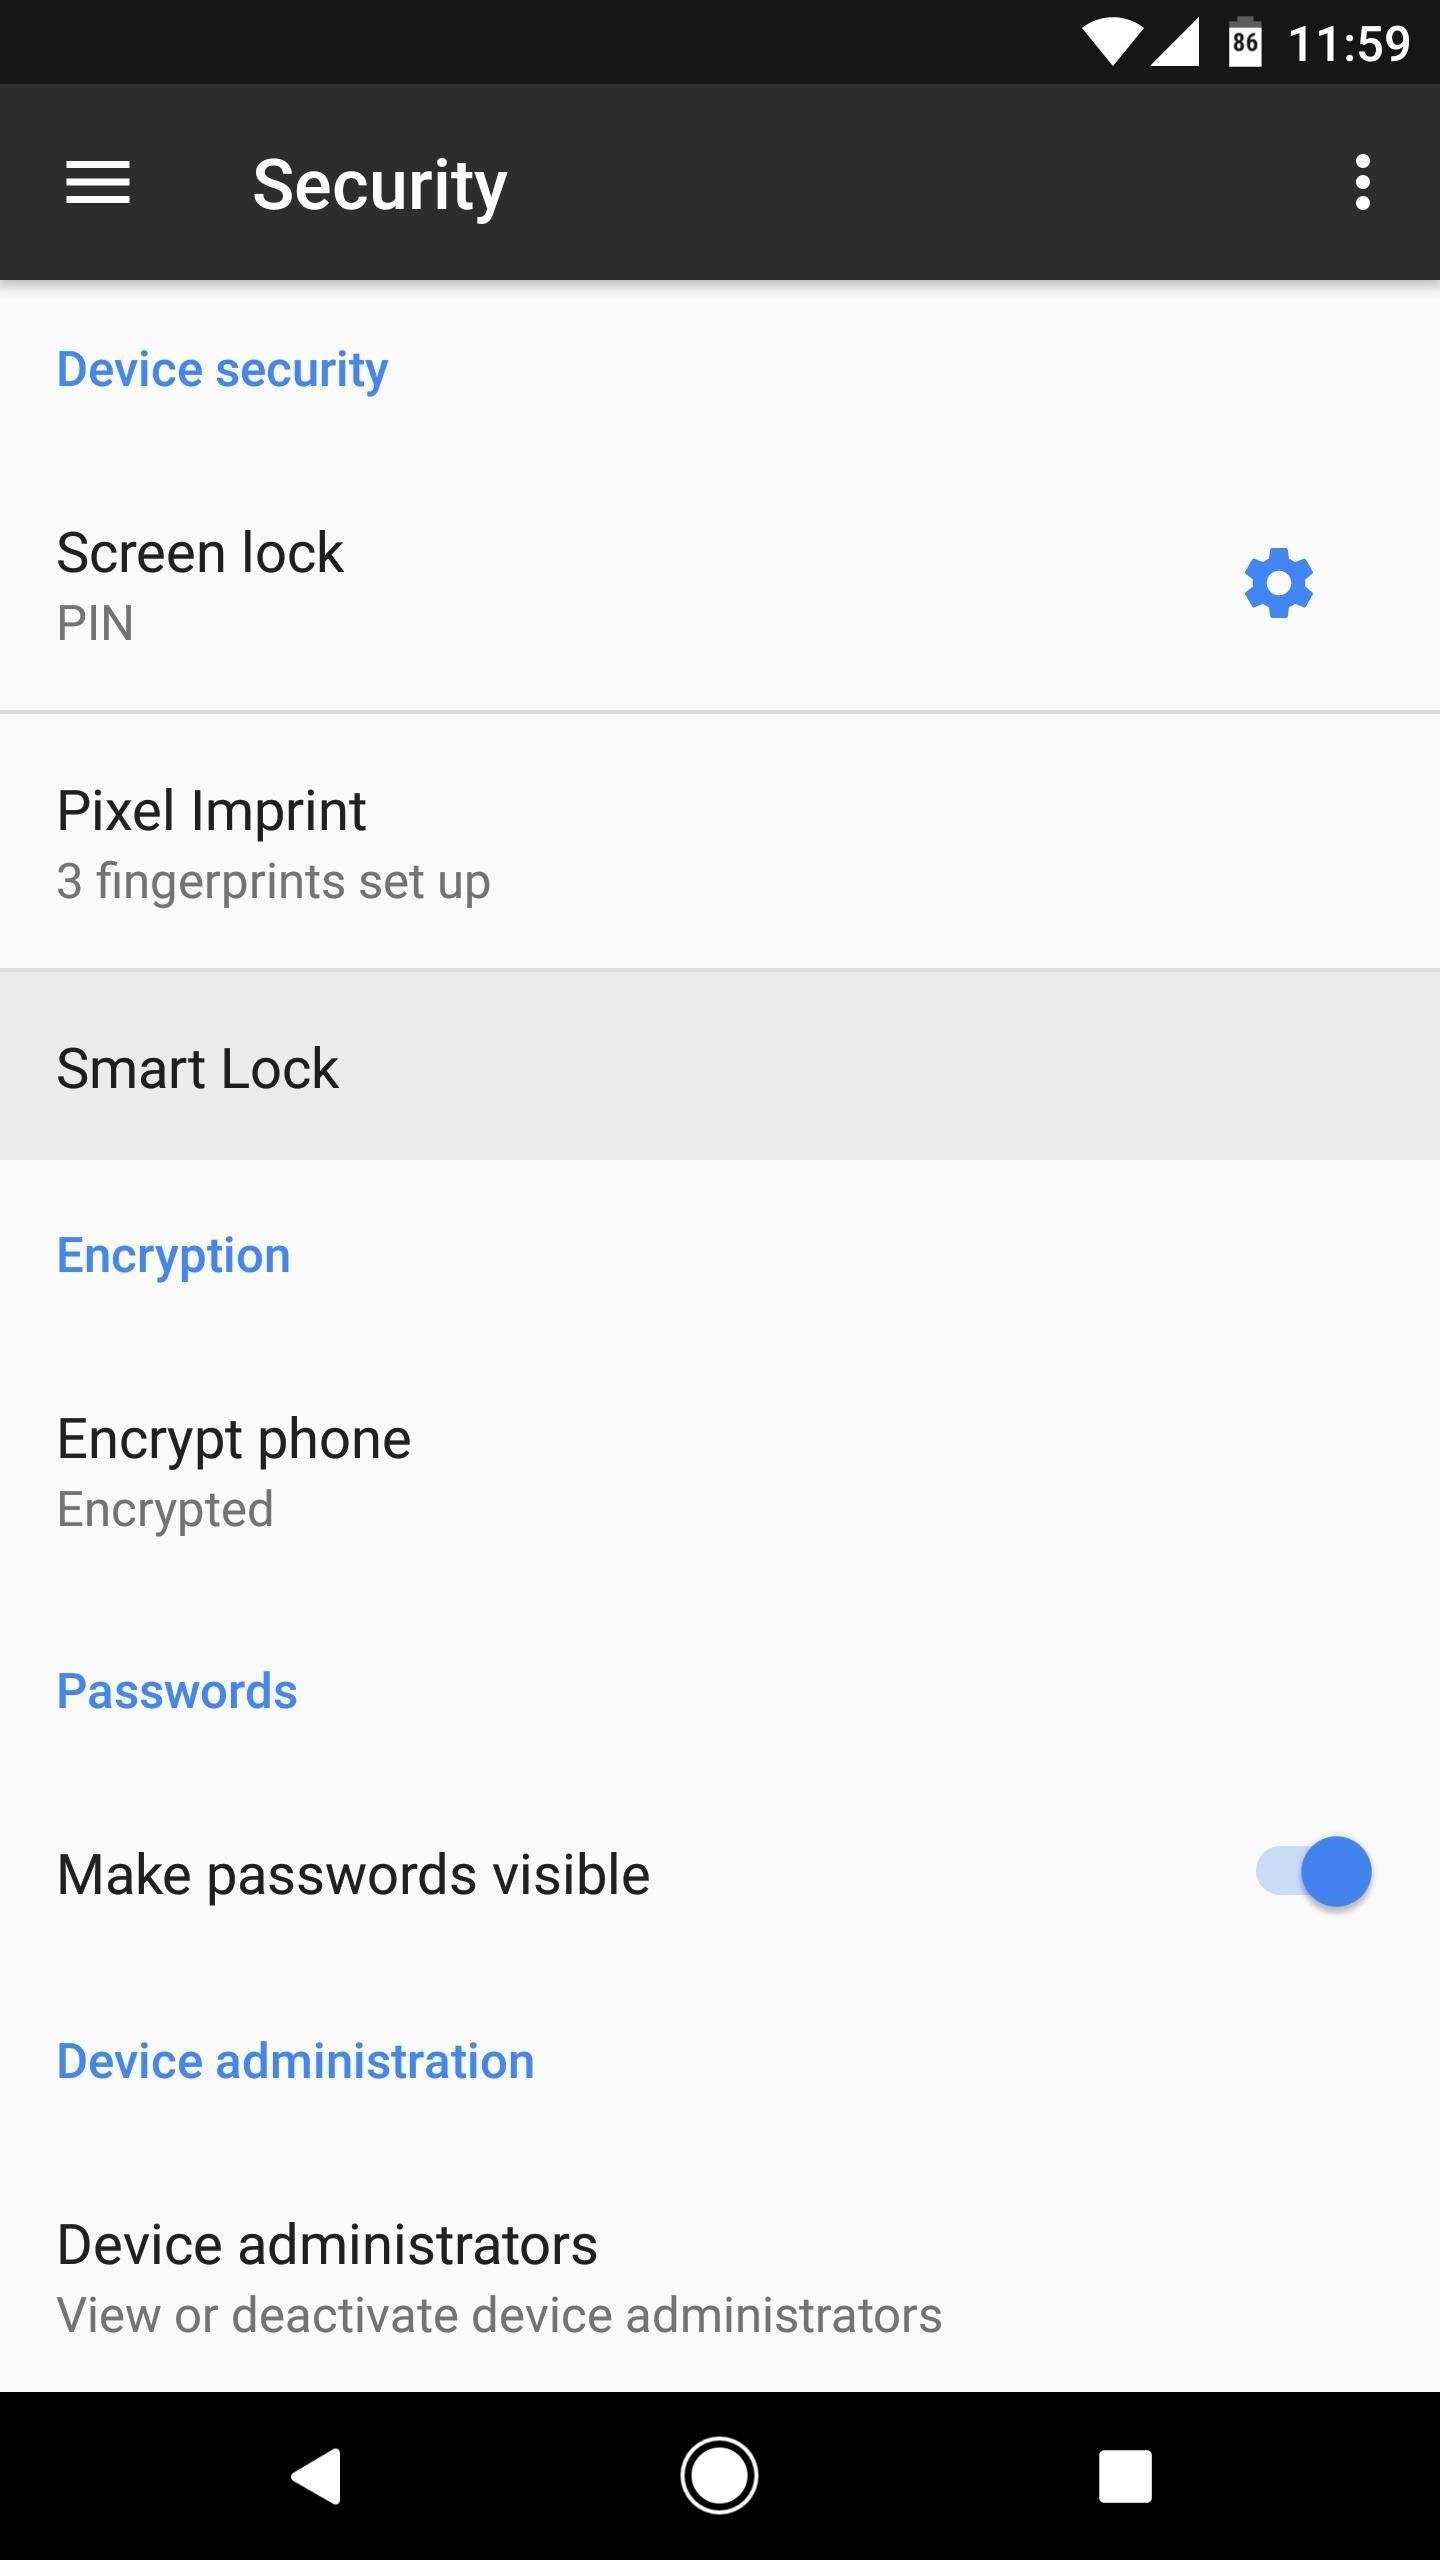 Lock Down Bluetooth, Force HTTPS & Adjust Other Options to Secure Your Android Device